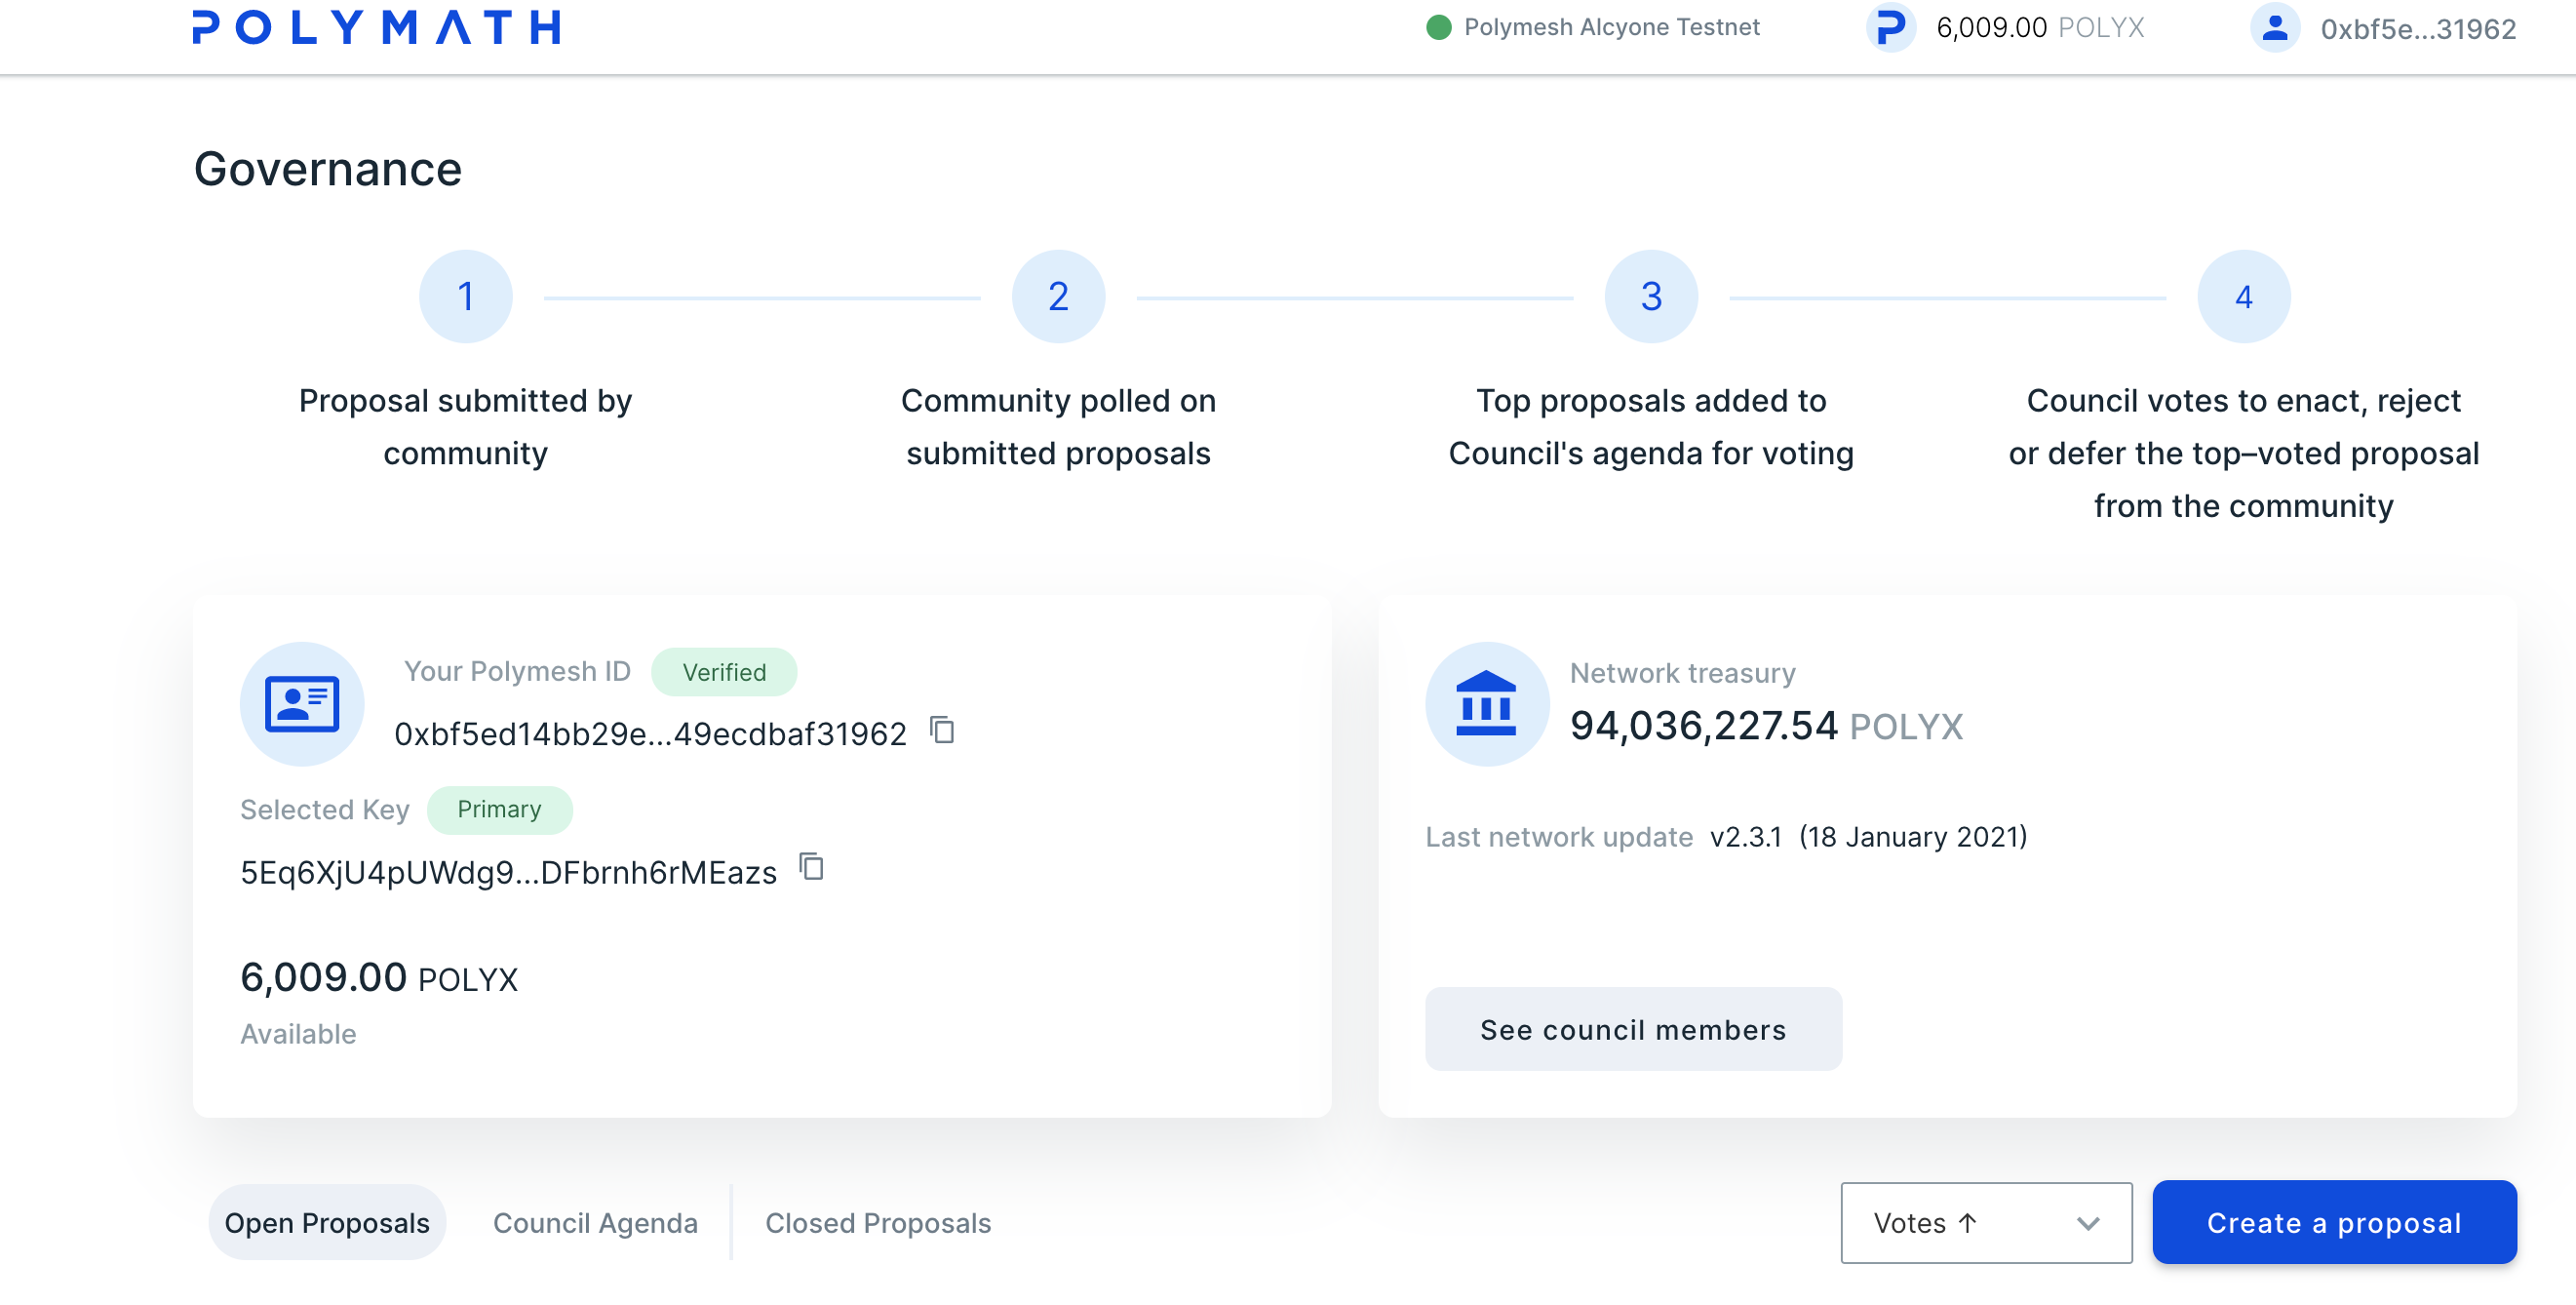 Governance Dashboard Overview